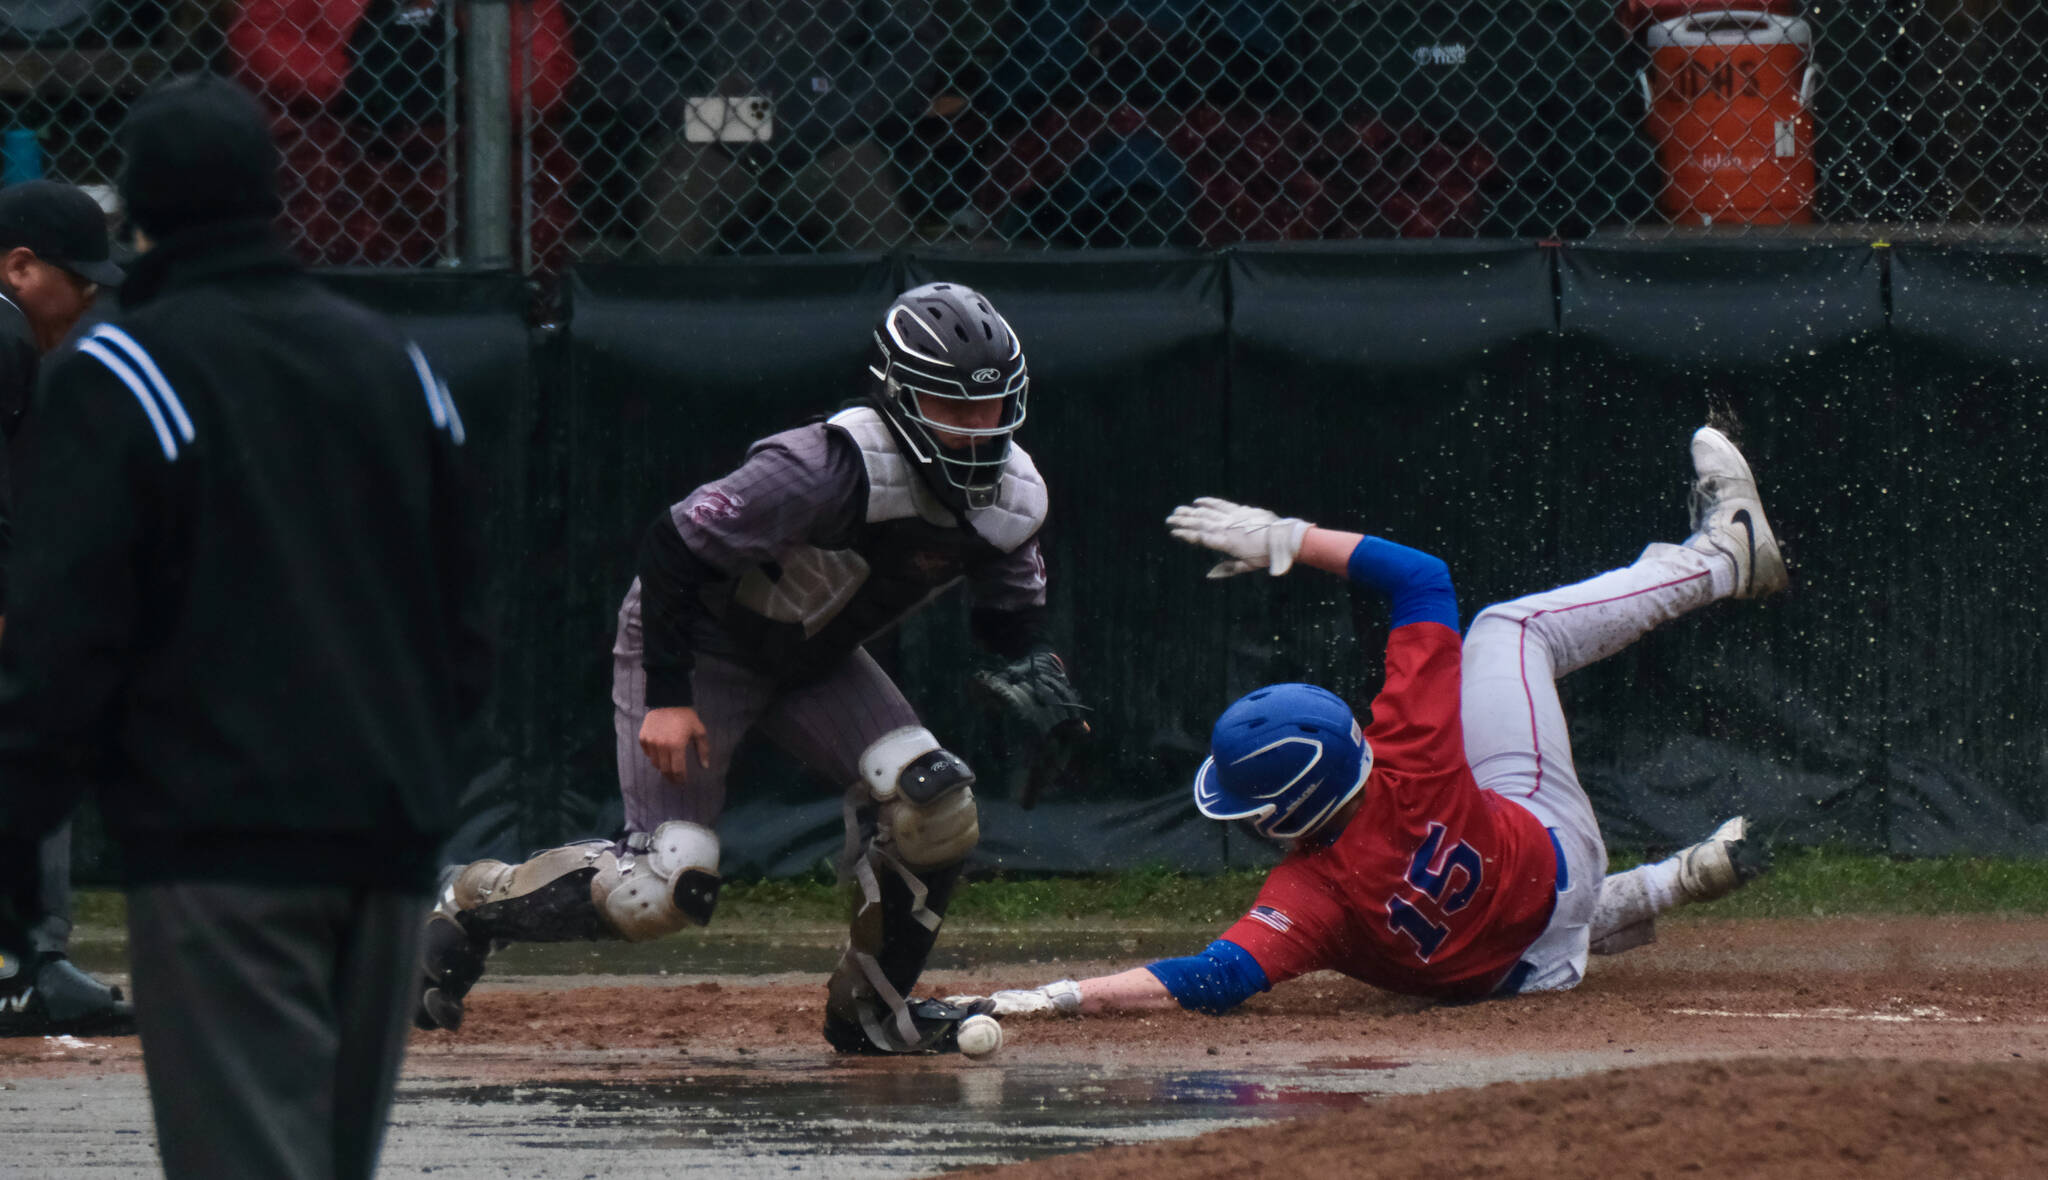 Sitka junior Grady Smith slides safely into home plate during the Wolves 13-7 win over the Ketchikan Kings for the Region V Baseball Championship on Saturday at Adair Kennedy Field (Klas Stolpe / Juneau Empire)